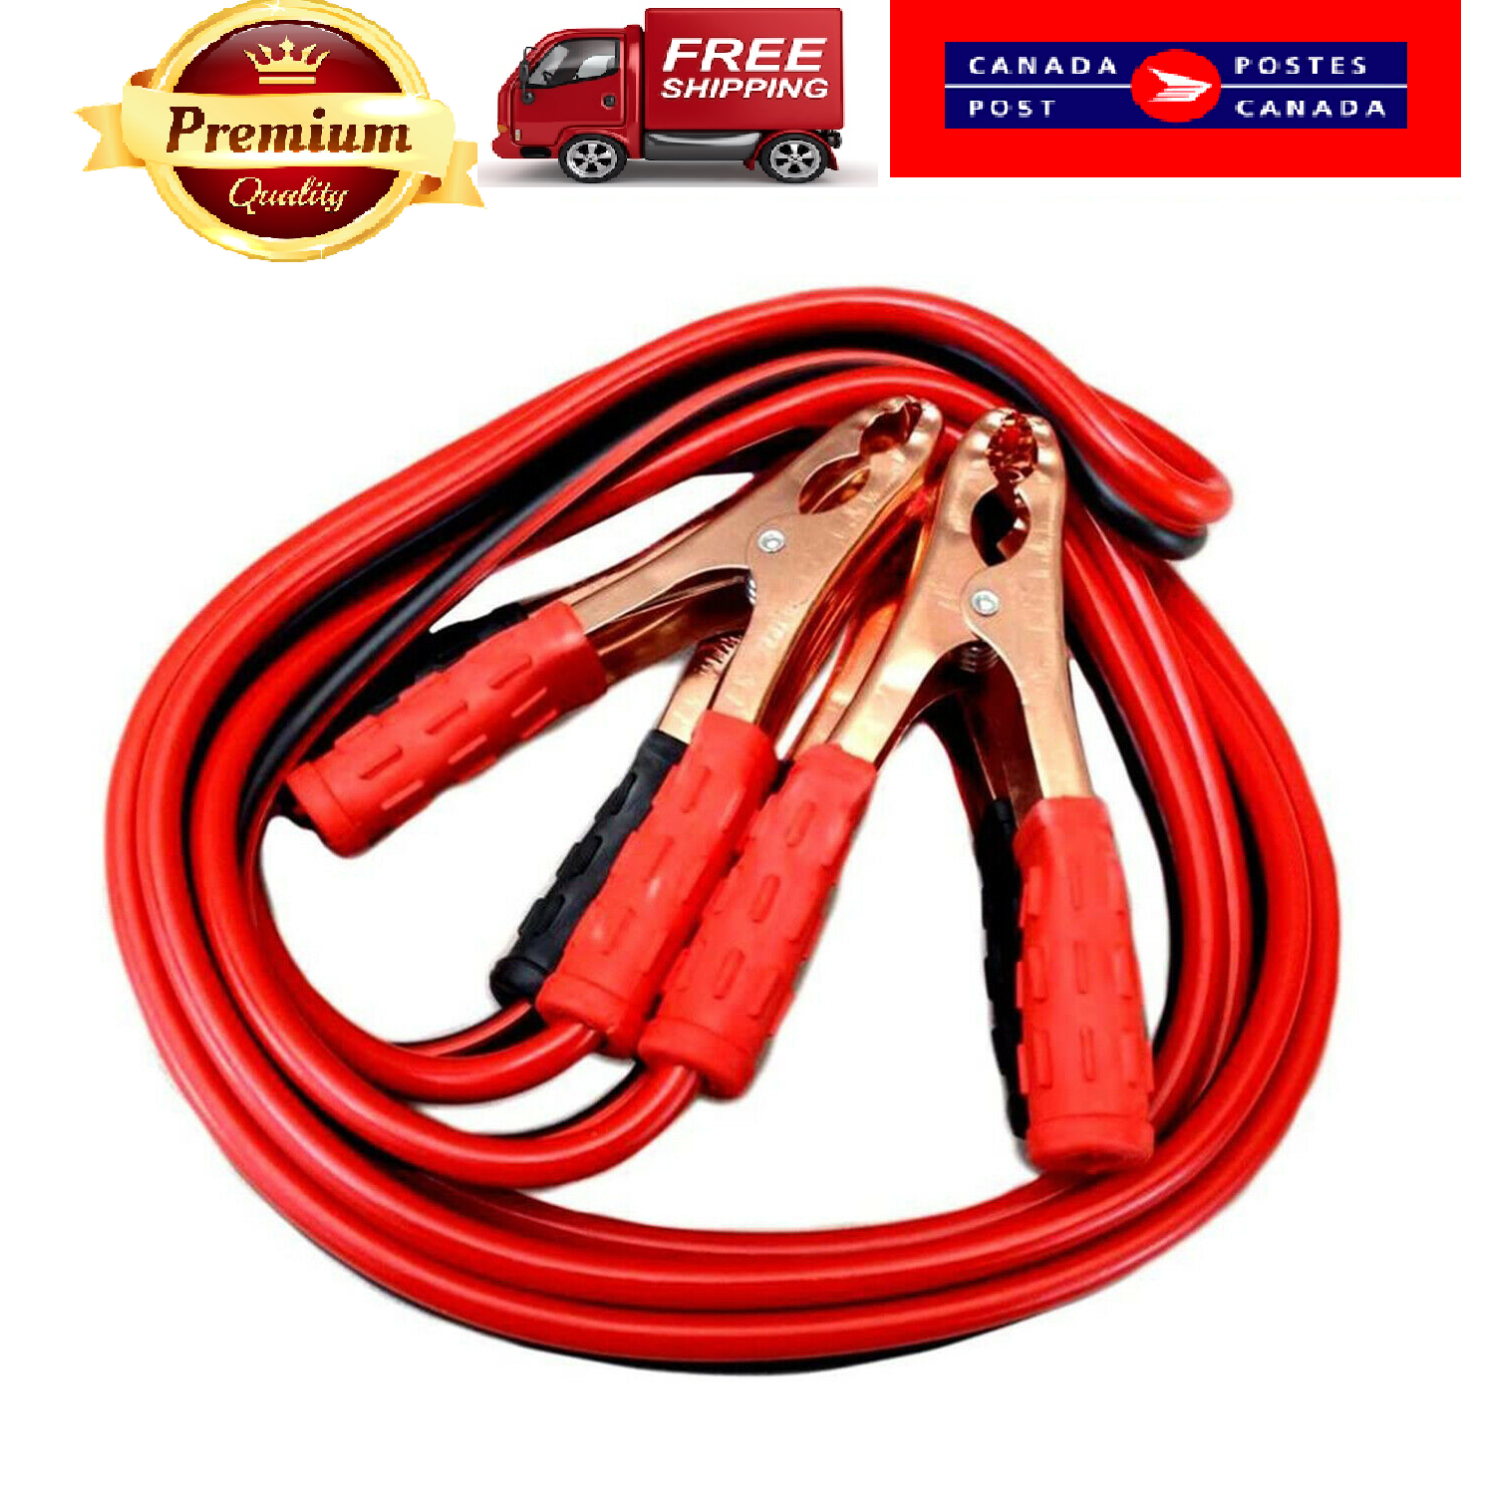 2Meter Car Heavy Duty Power Cable 500A Booster Emergency Battery Jumper Stater Line with 4 Clips 